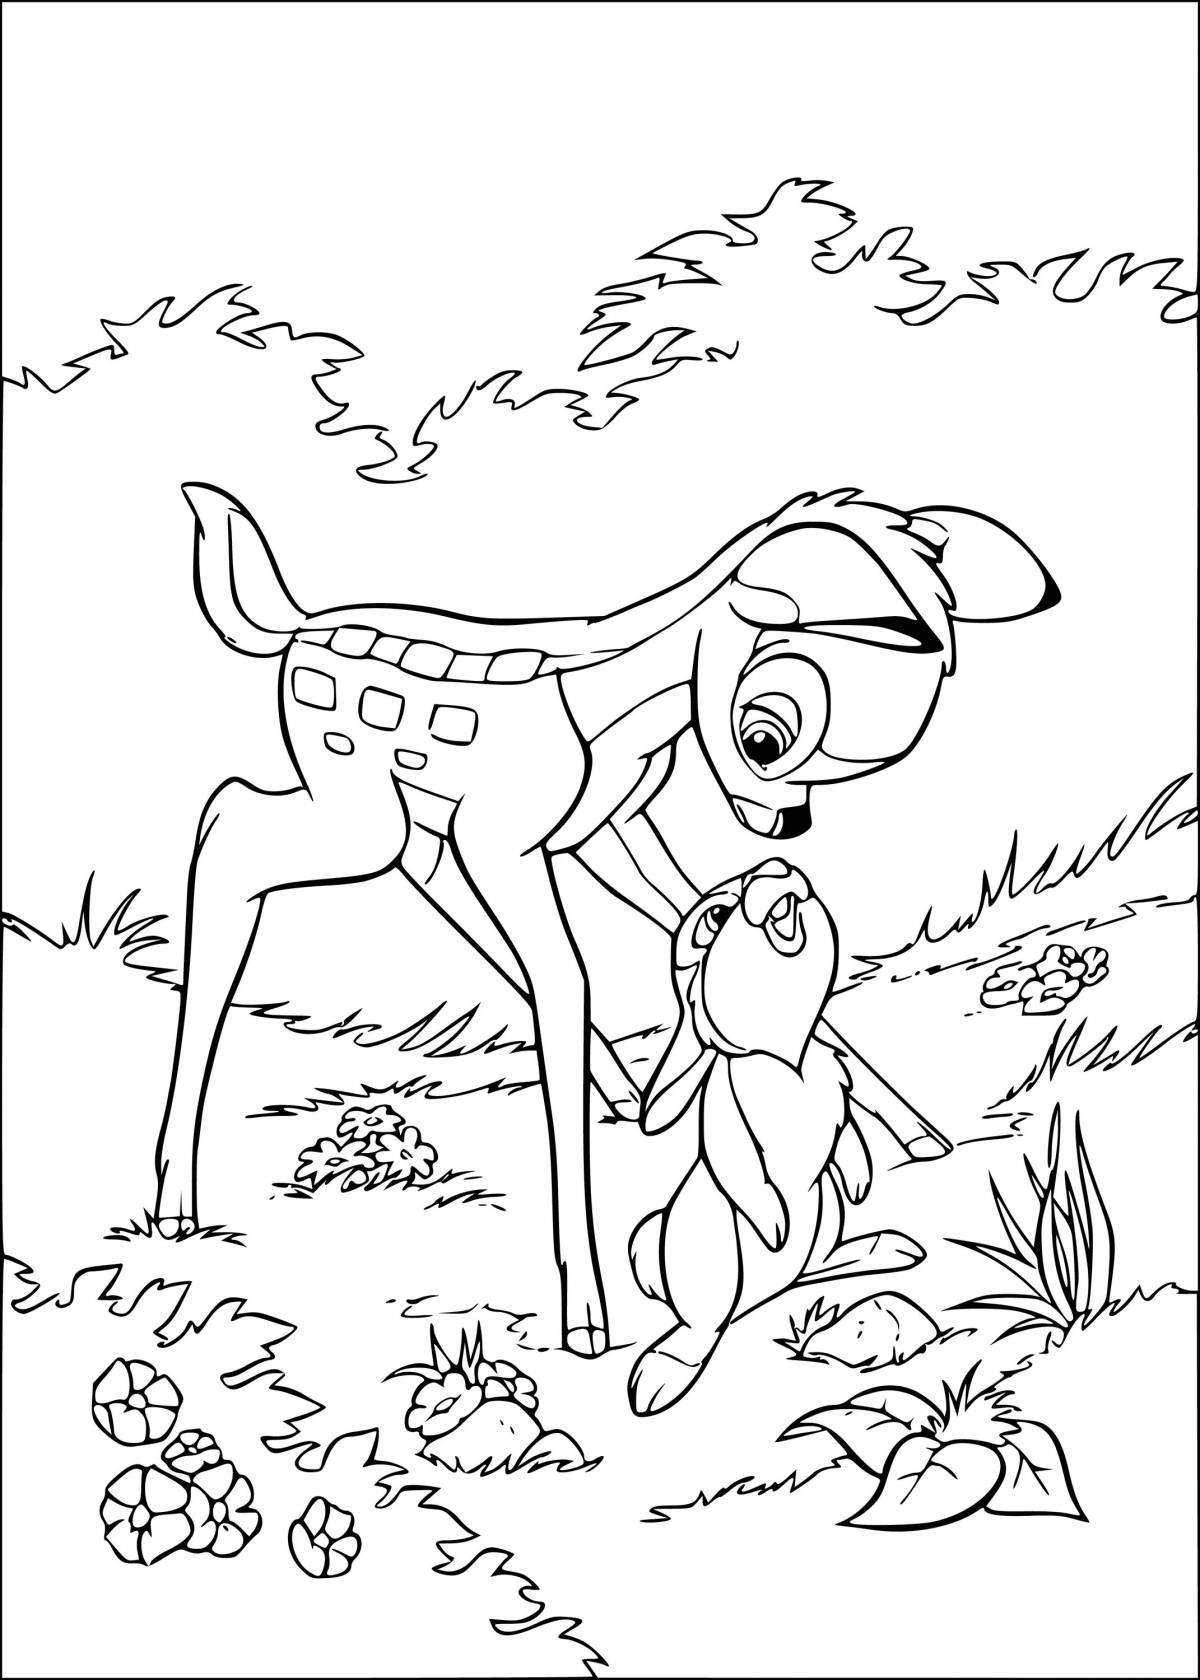 Delightful bambi coloring book for kids